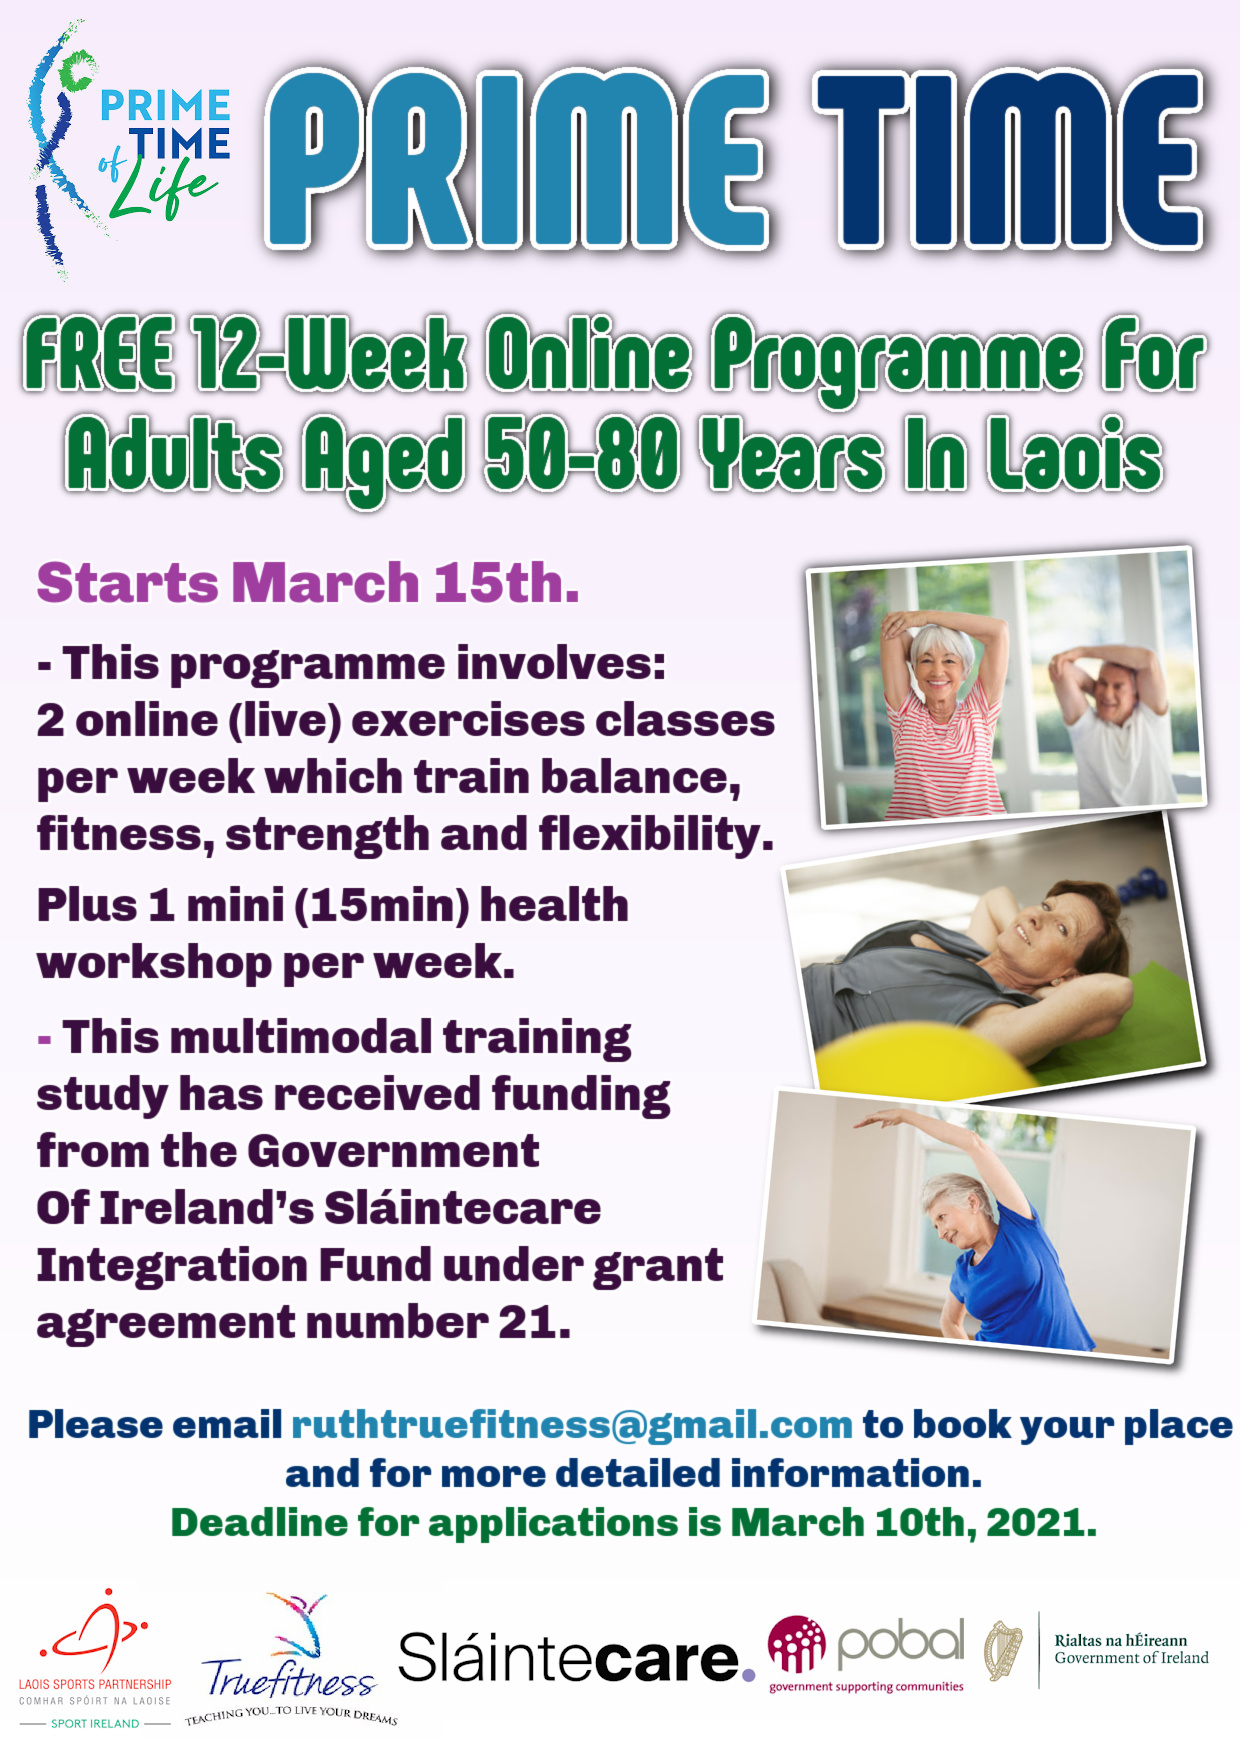 Free “Prime Time” Physical Activity Programme for Older Adults, March 2021